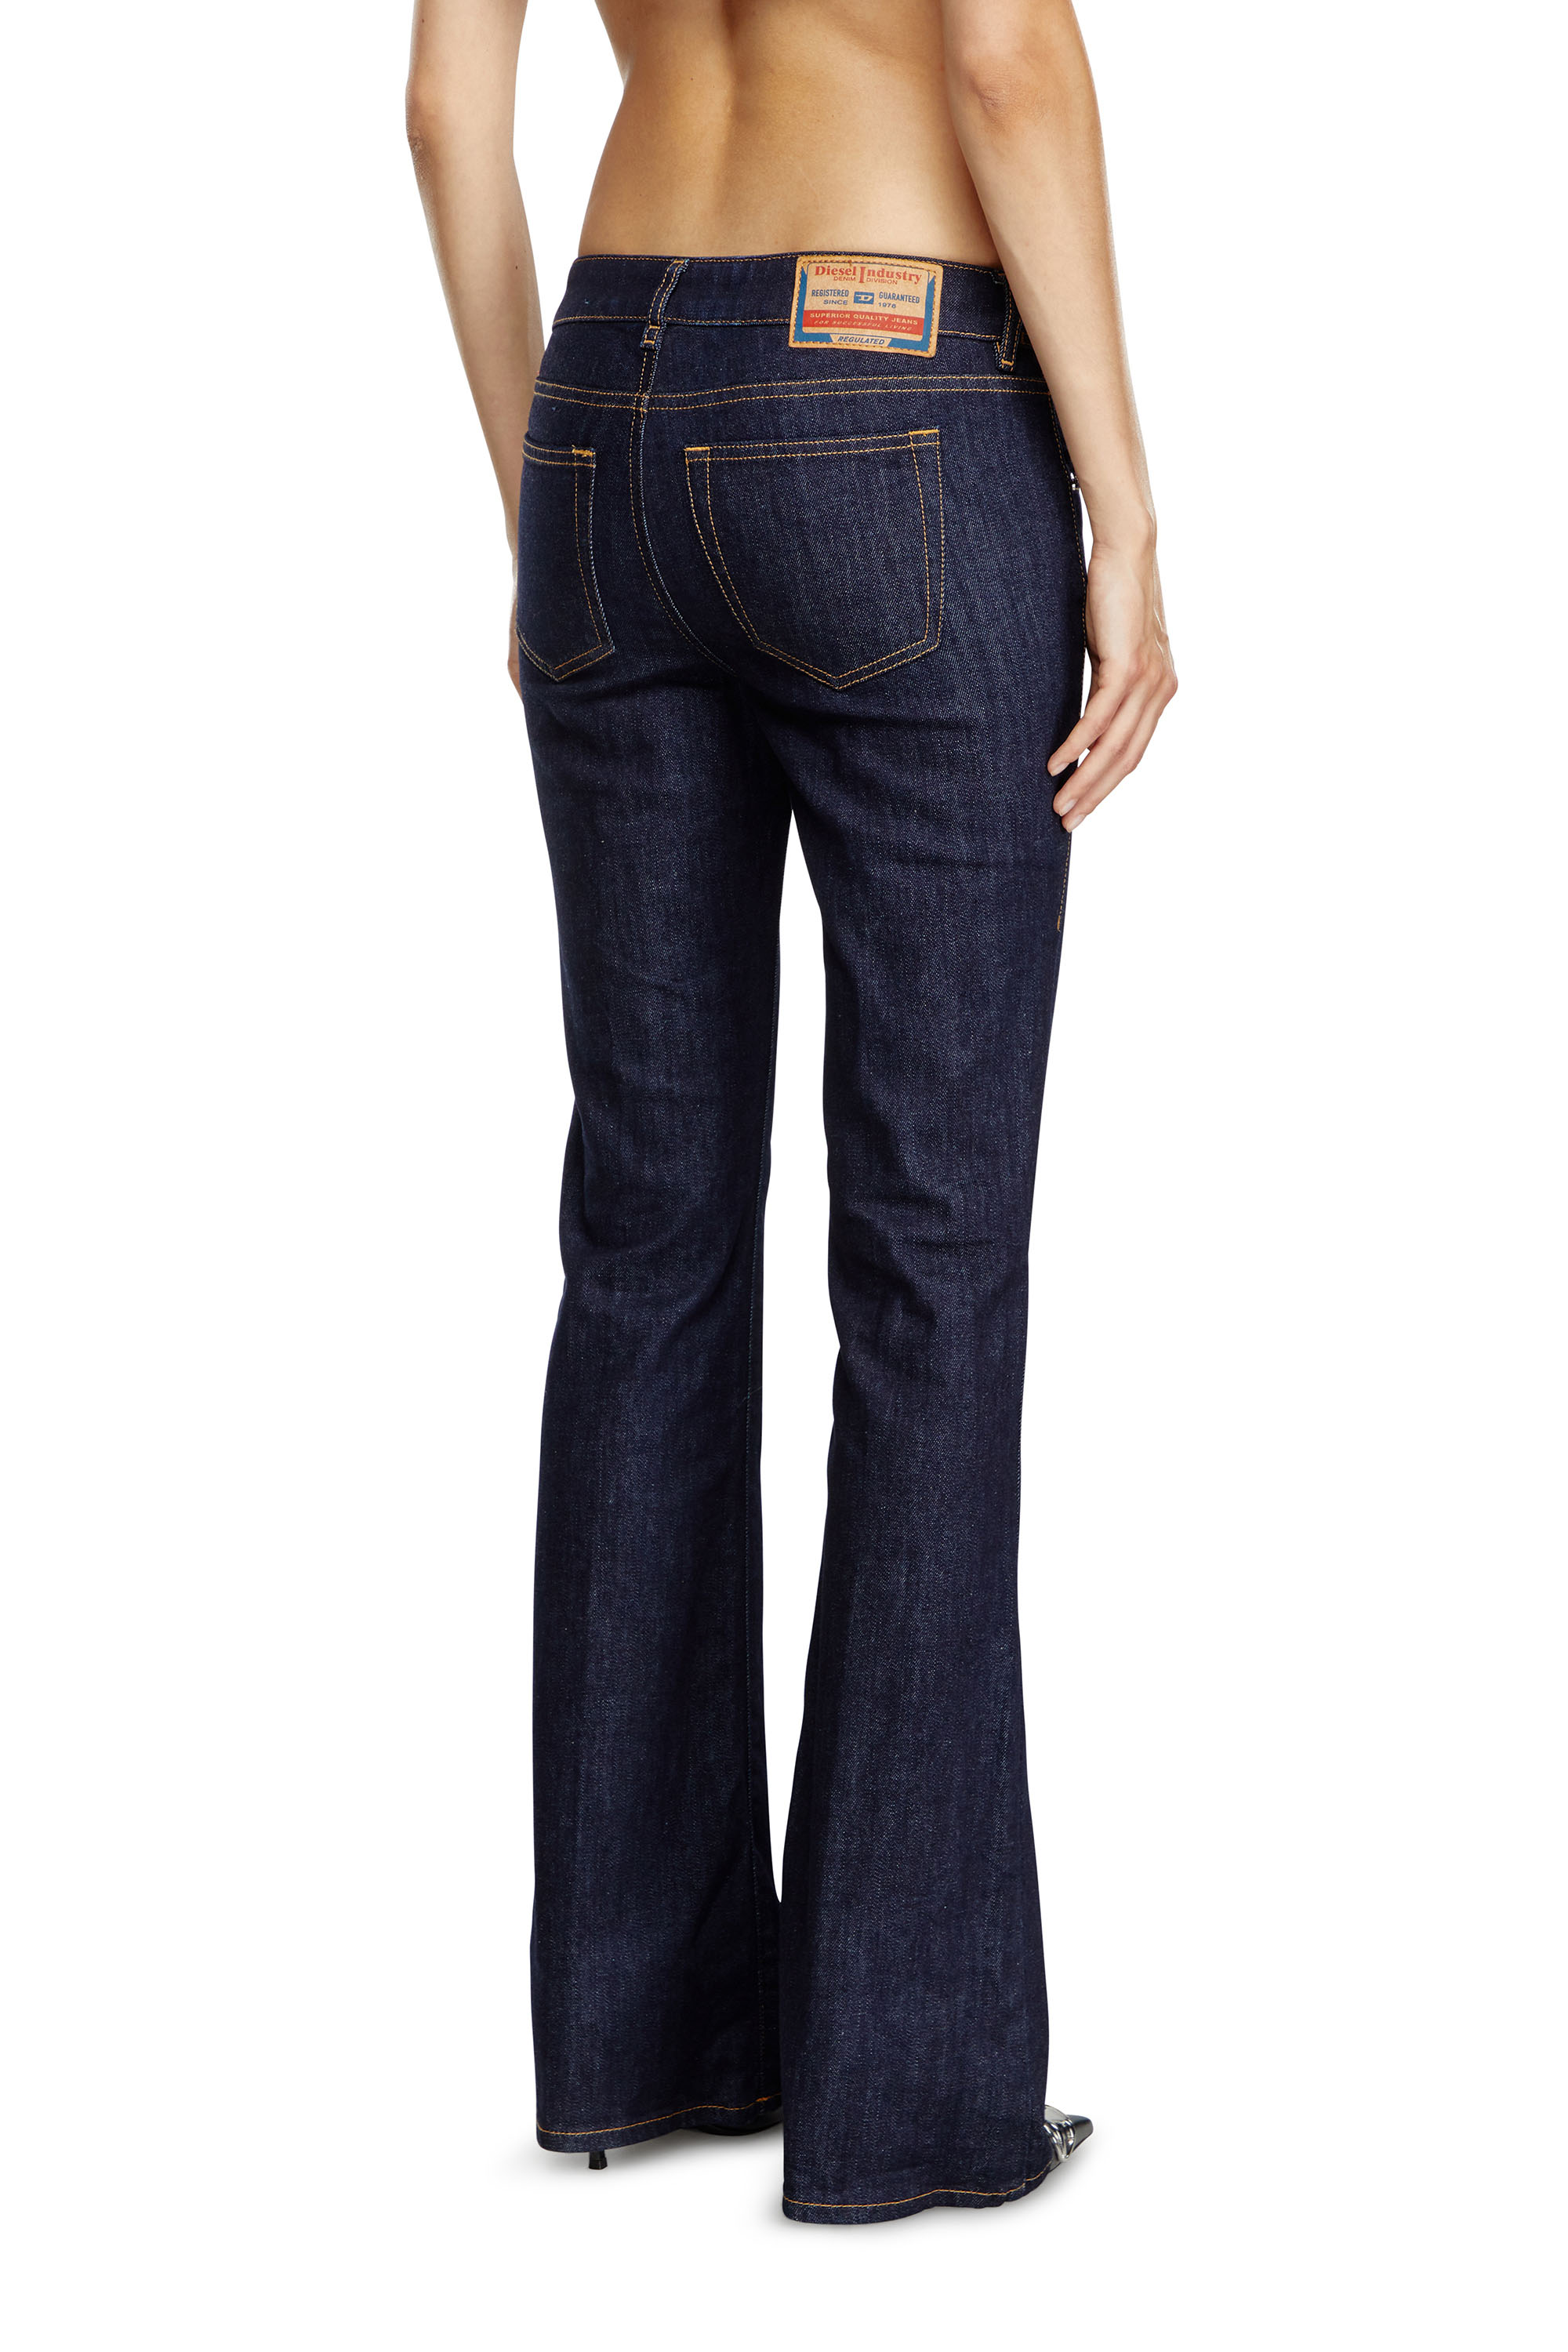 Diesel - Bootcut and Flare Jeans 1969 D-Ebbey Z9B89, Mujer Bootcut y Flare Jeans - 1969 D-Ebbey in Azul marino - Image 3